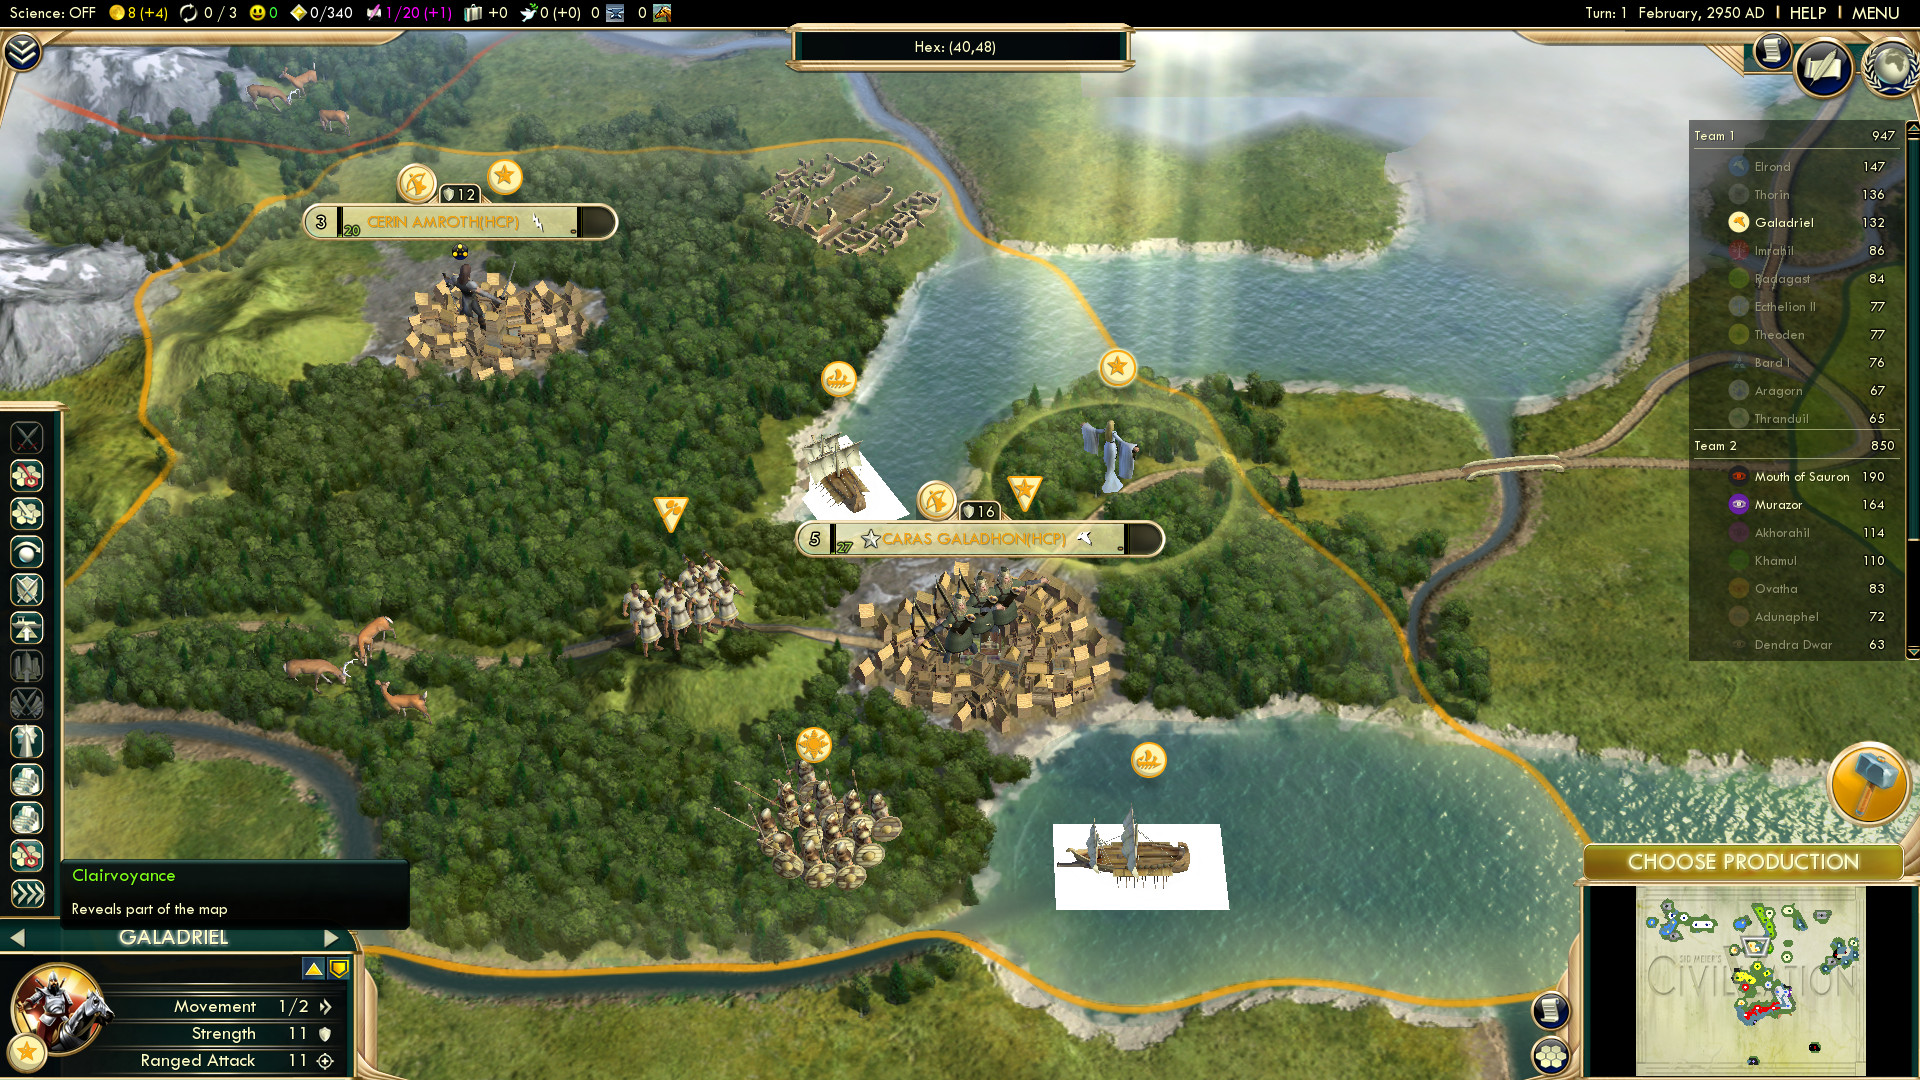 Galadriel And Hidden Cities Of Lothlorien Image Lord Of The Rings Scenario For Civ V V 26 Mod For Civilization V Mod Db